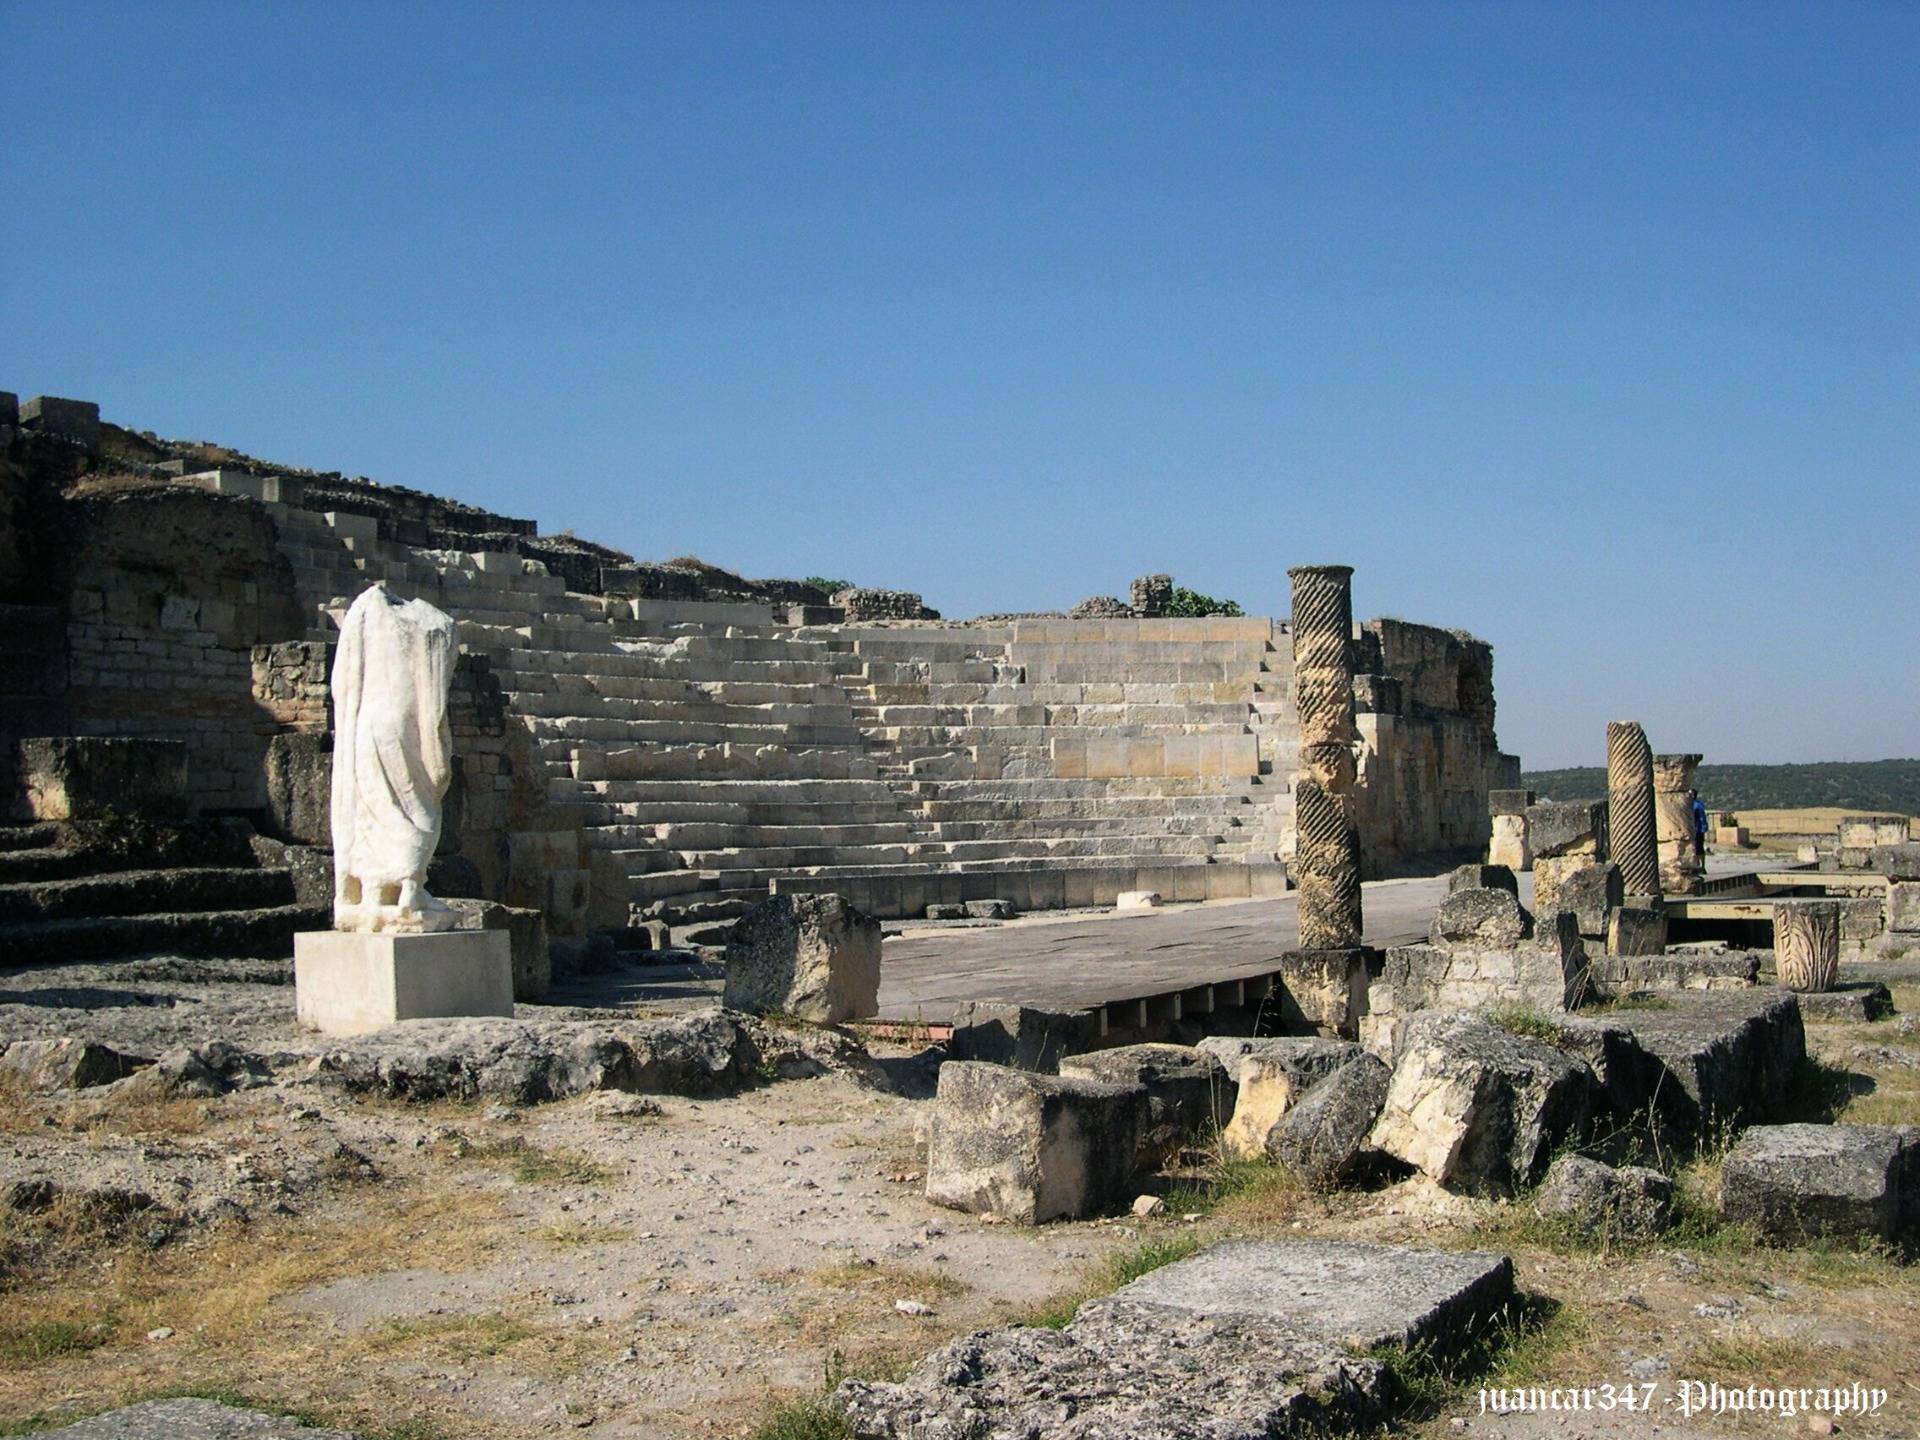 View of the Forum and the Theater